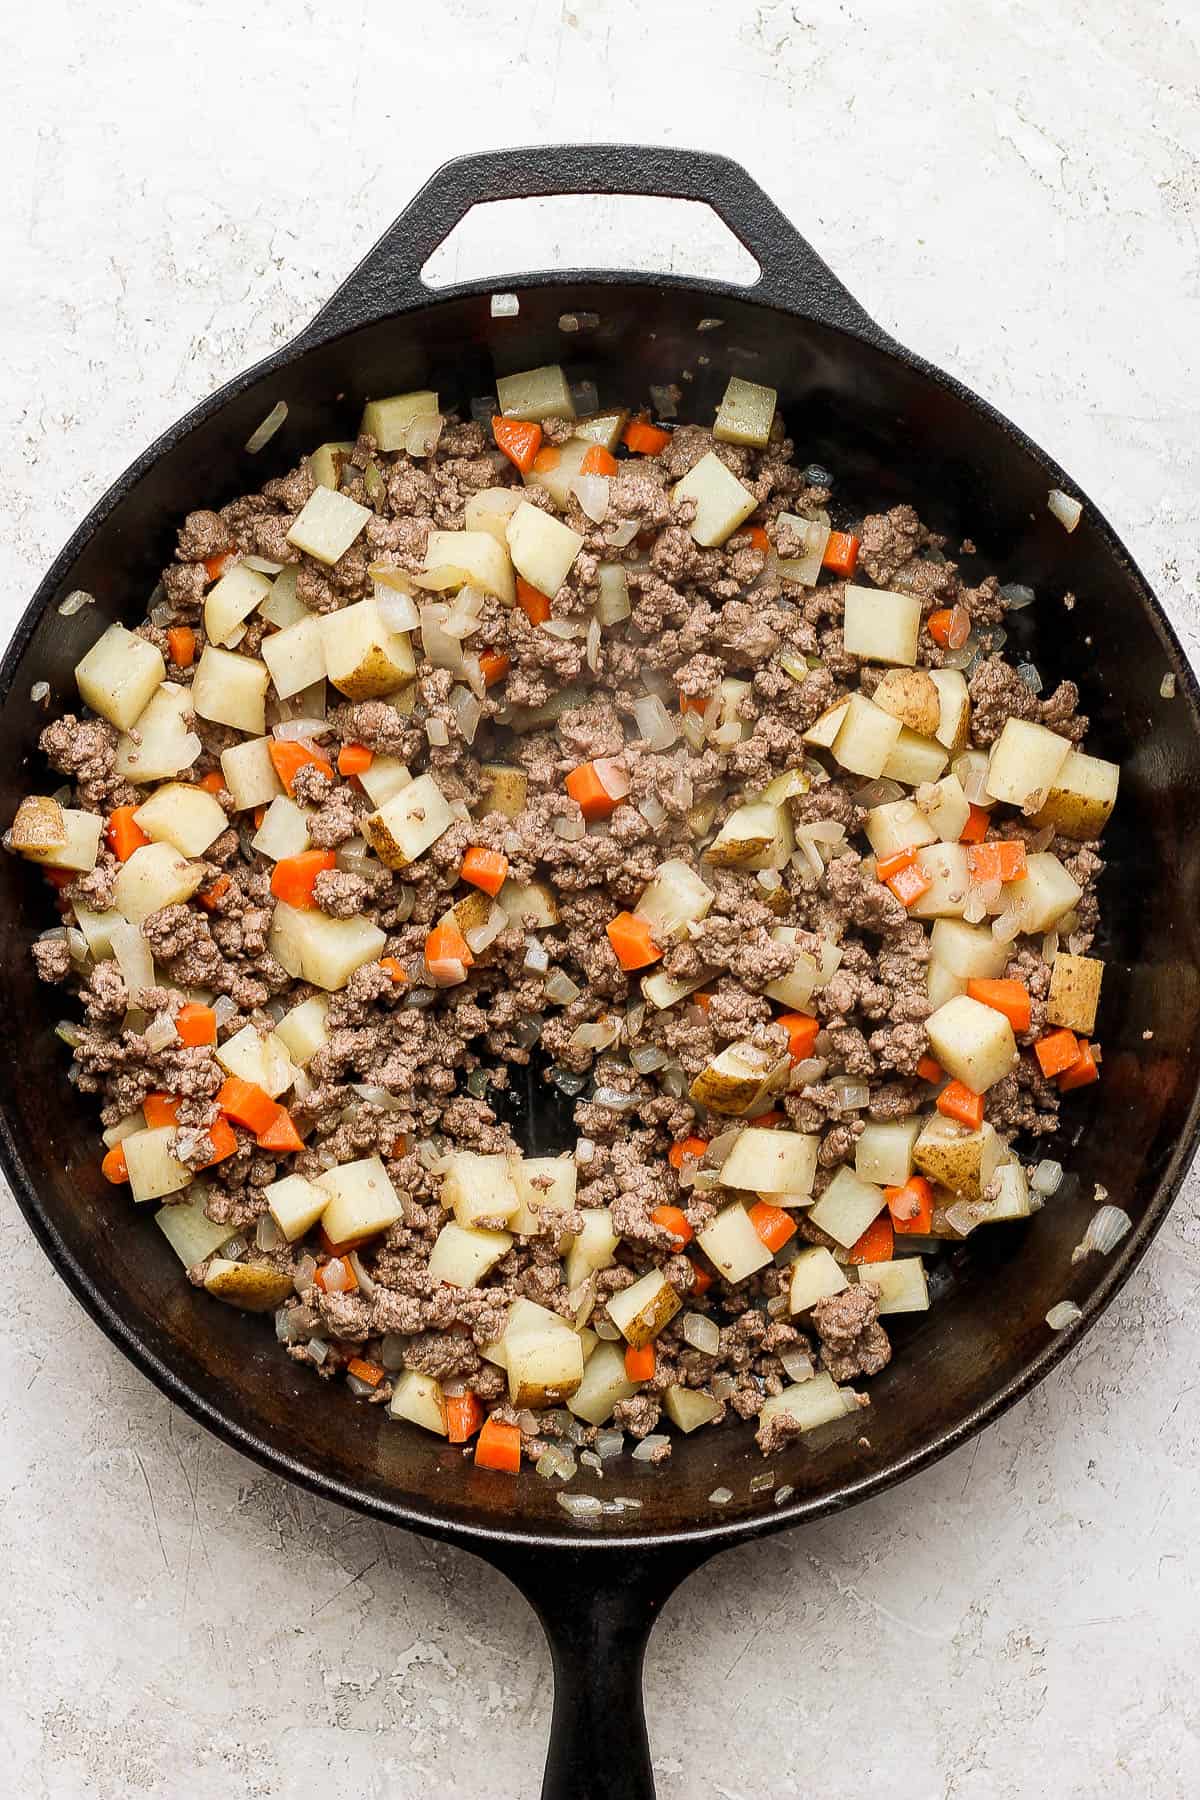 Ground beef, onions, diced potatoes, and diced carrots cooking in a skillet.